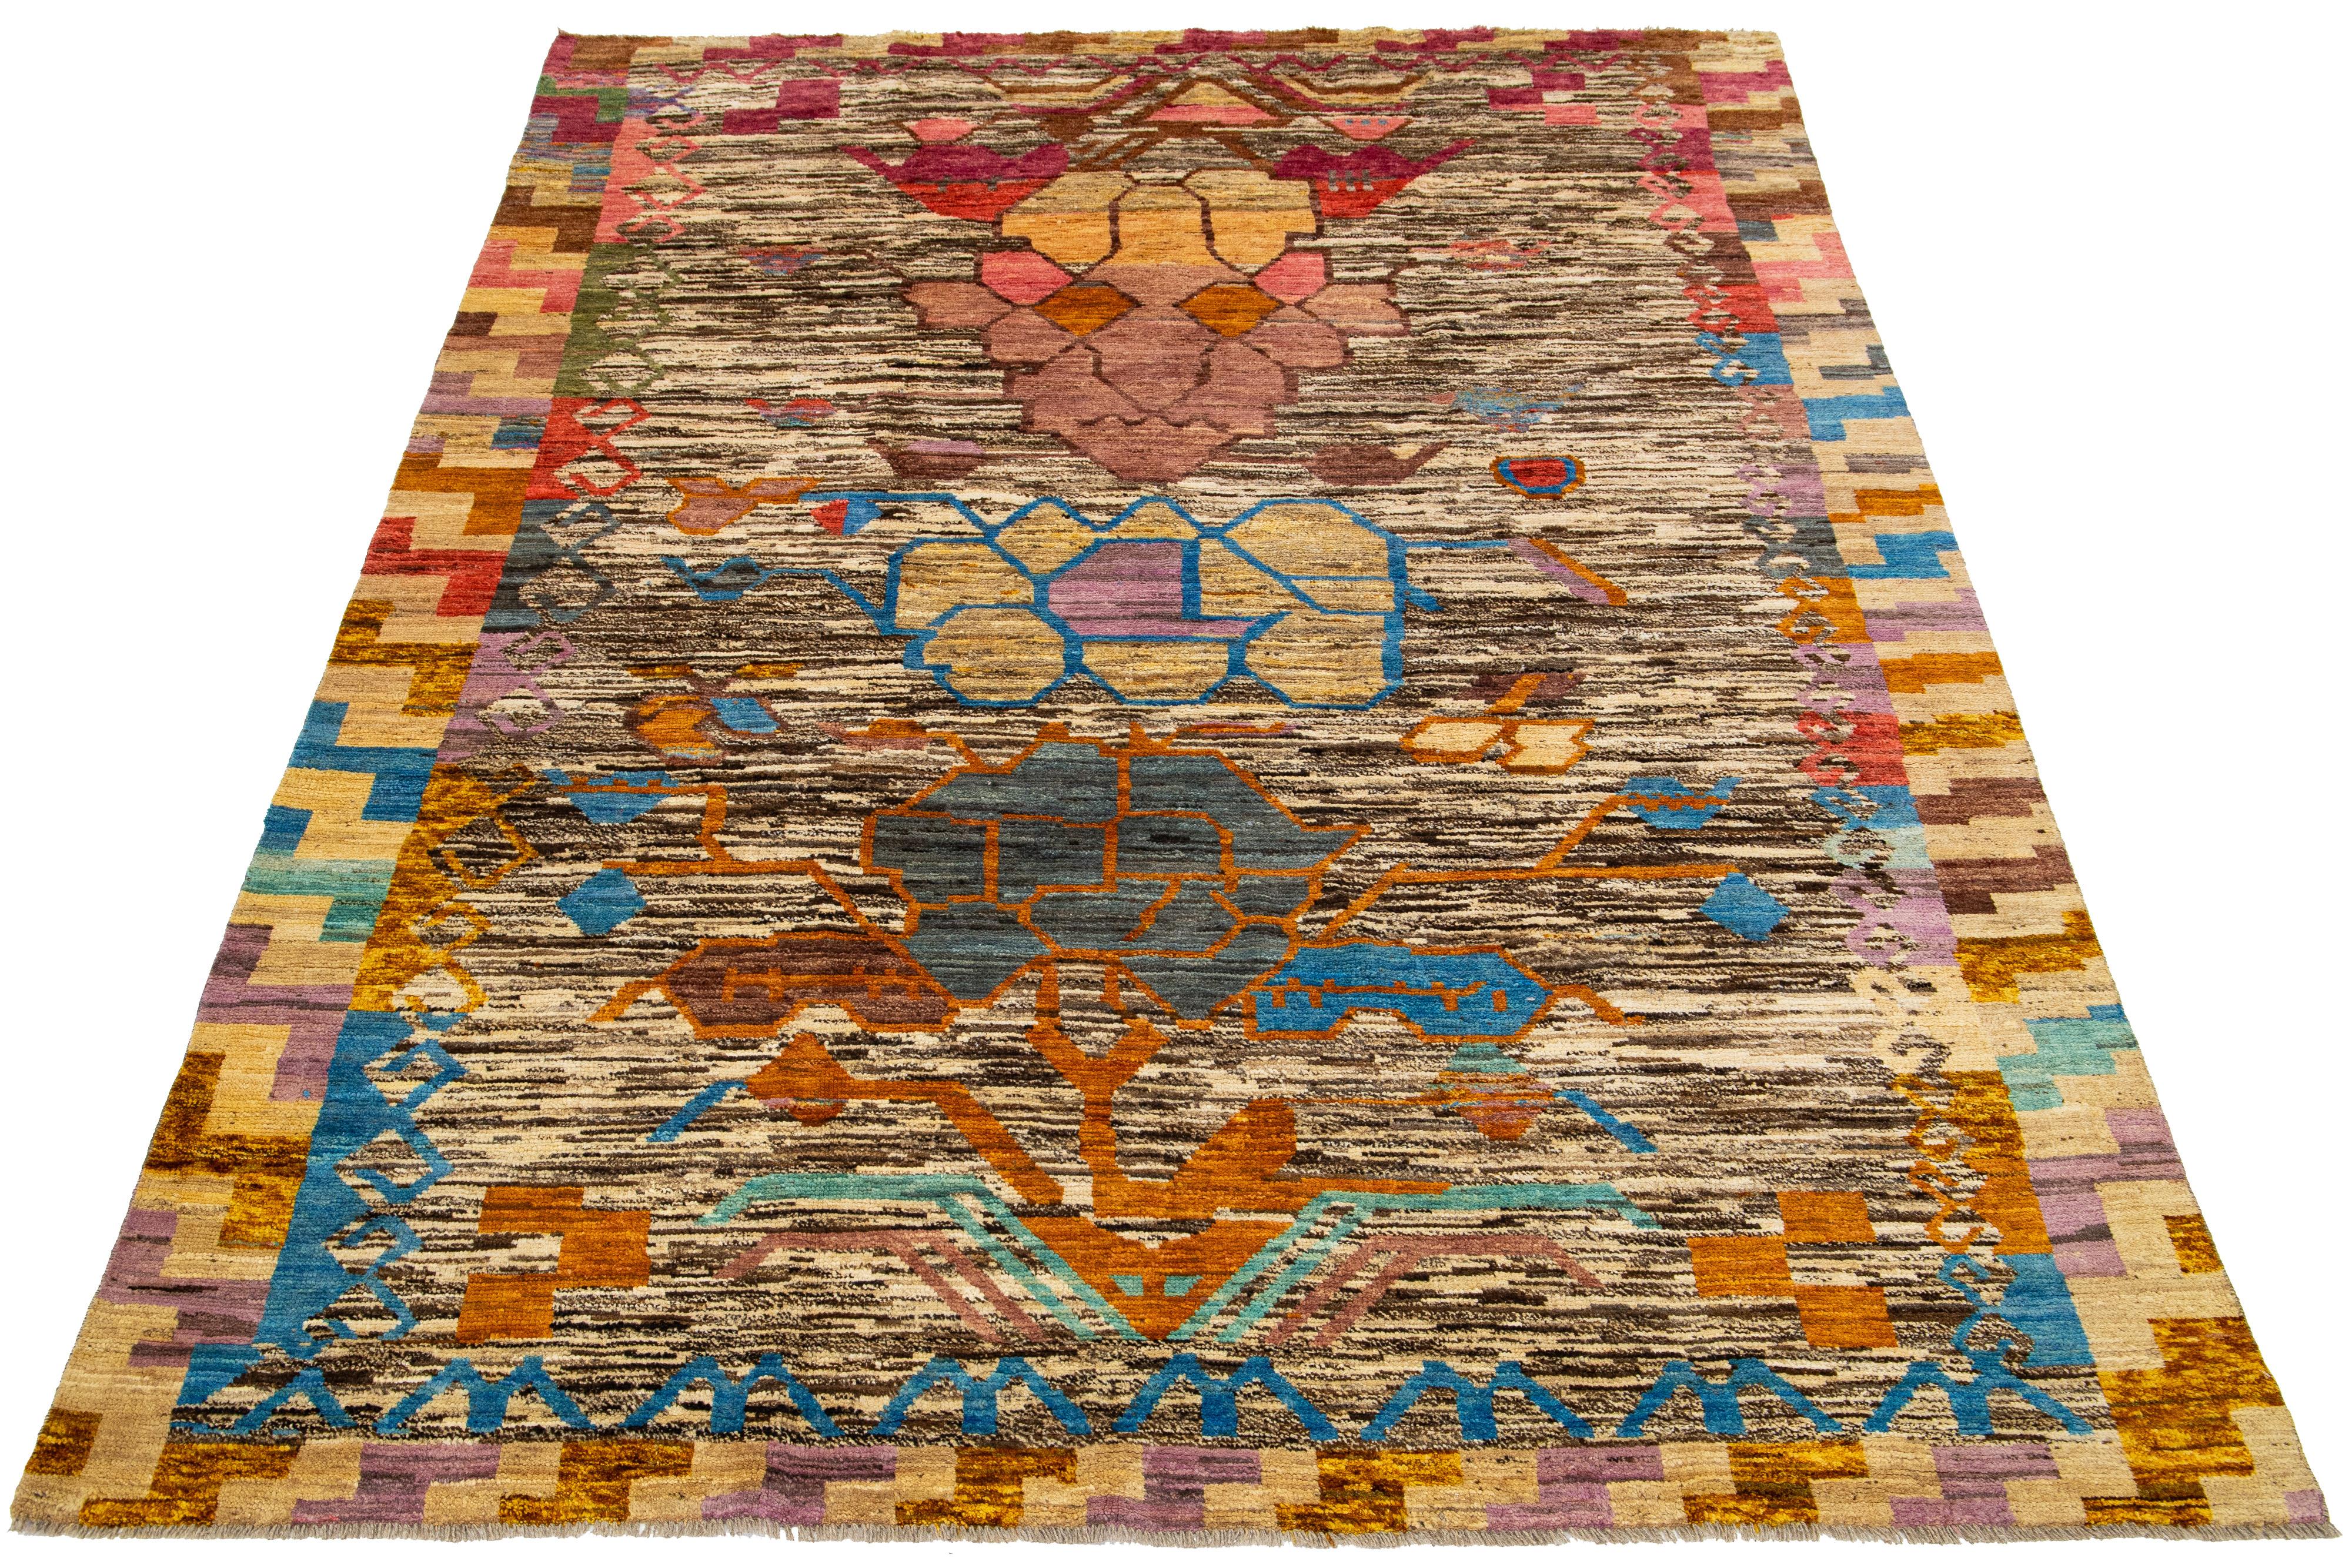 This modern Moroccan wool rug showcases a captivating Tribal pattern in a multitude of colors, adding vibrancy to any space. It features a beautiful beige and brown color field.

This rug measures 6'8